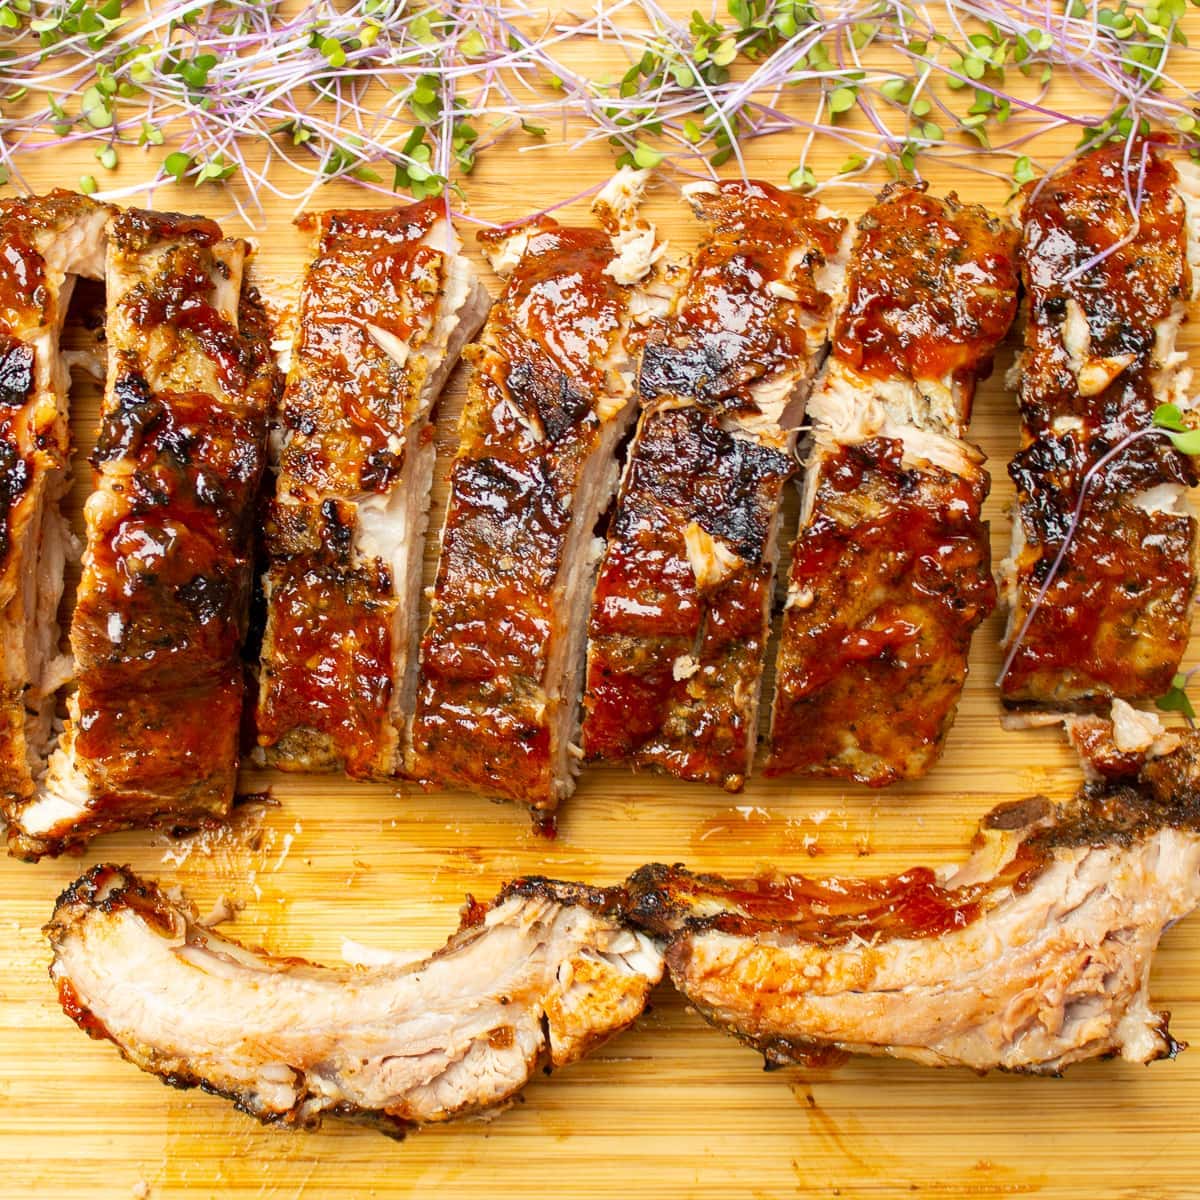 sous vide baby back ribs with a sweet tangy BBQ sauce. mouthwatering.